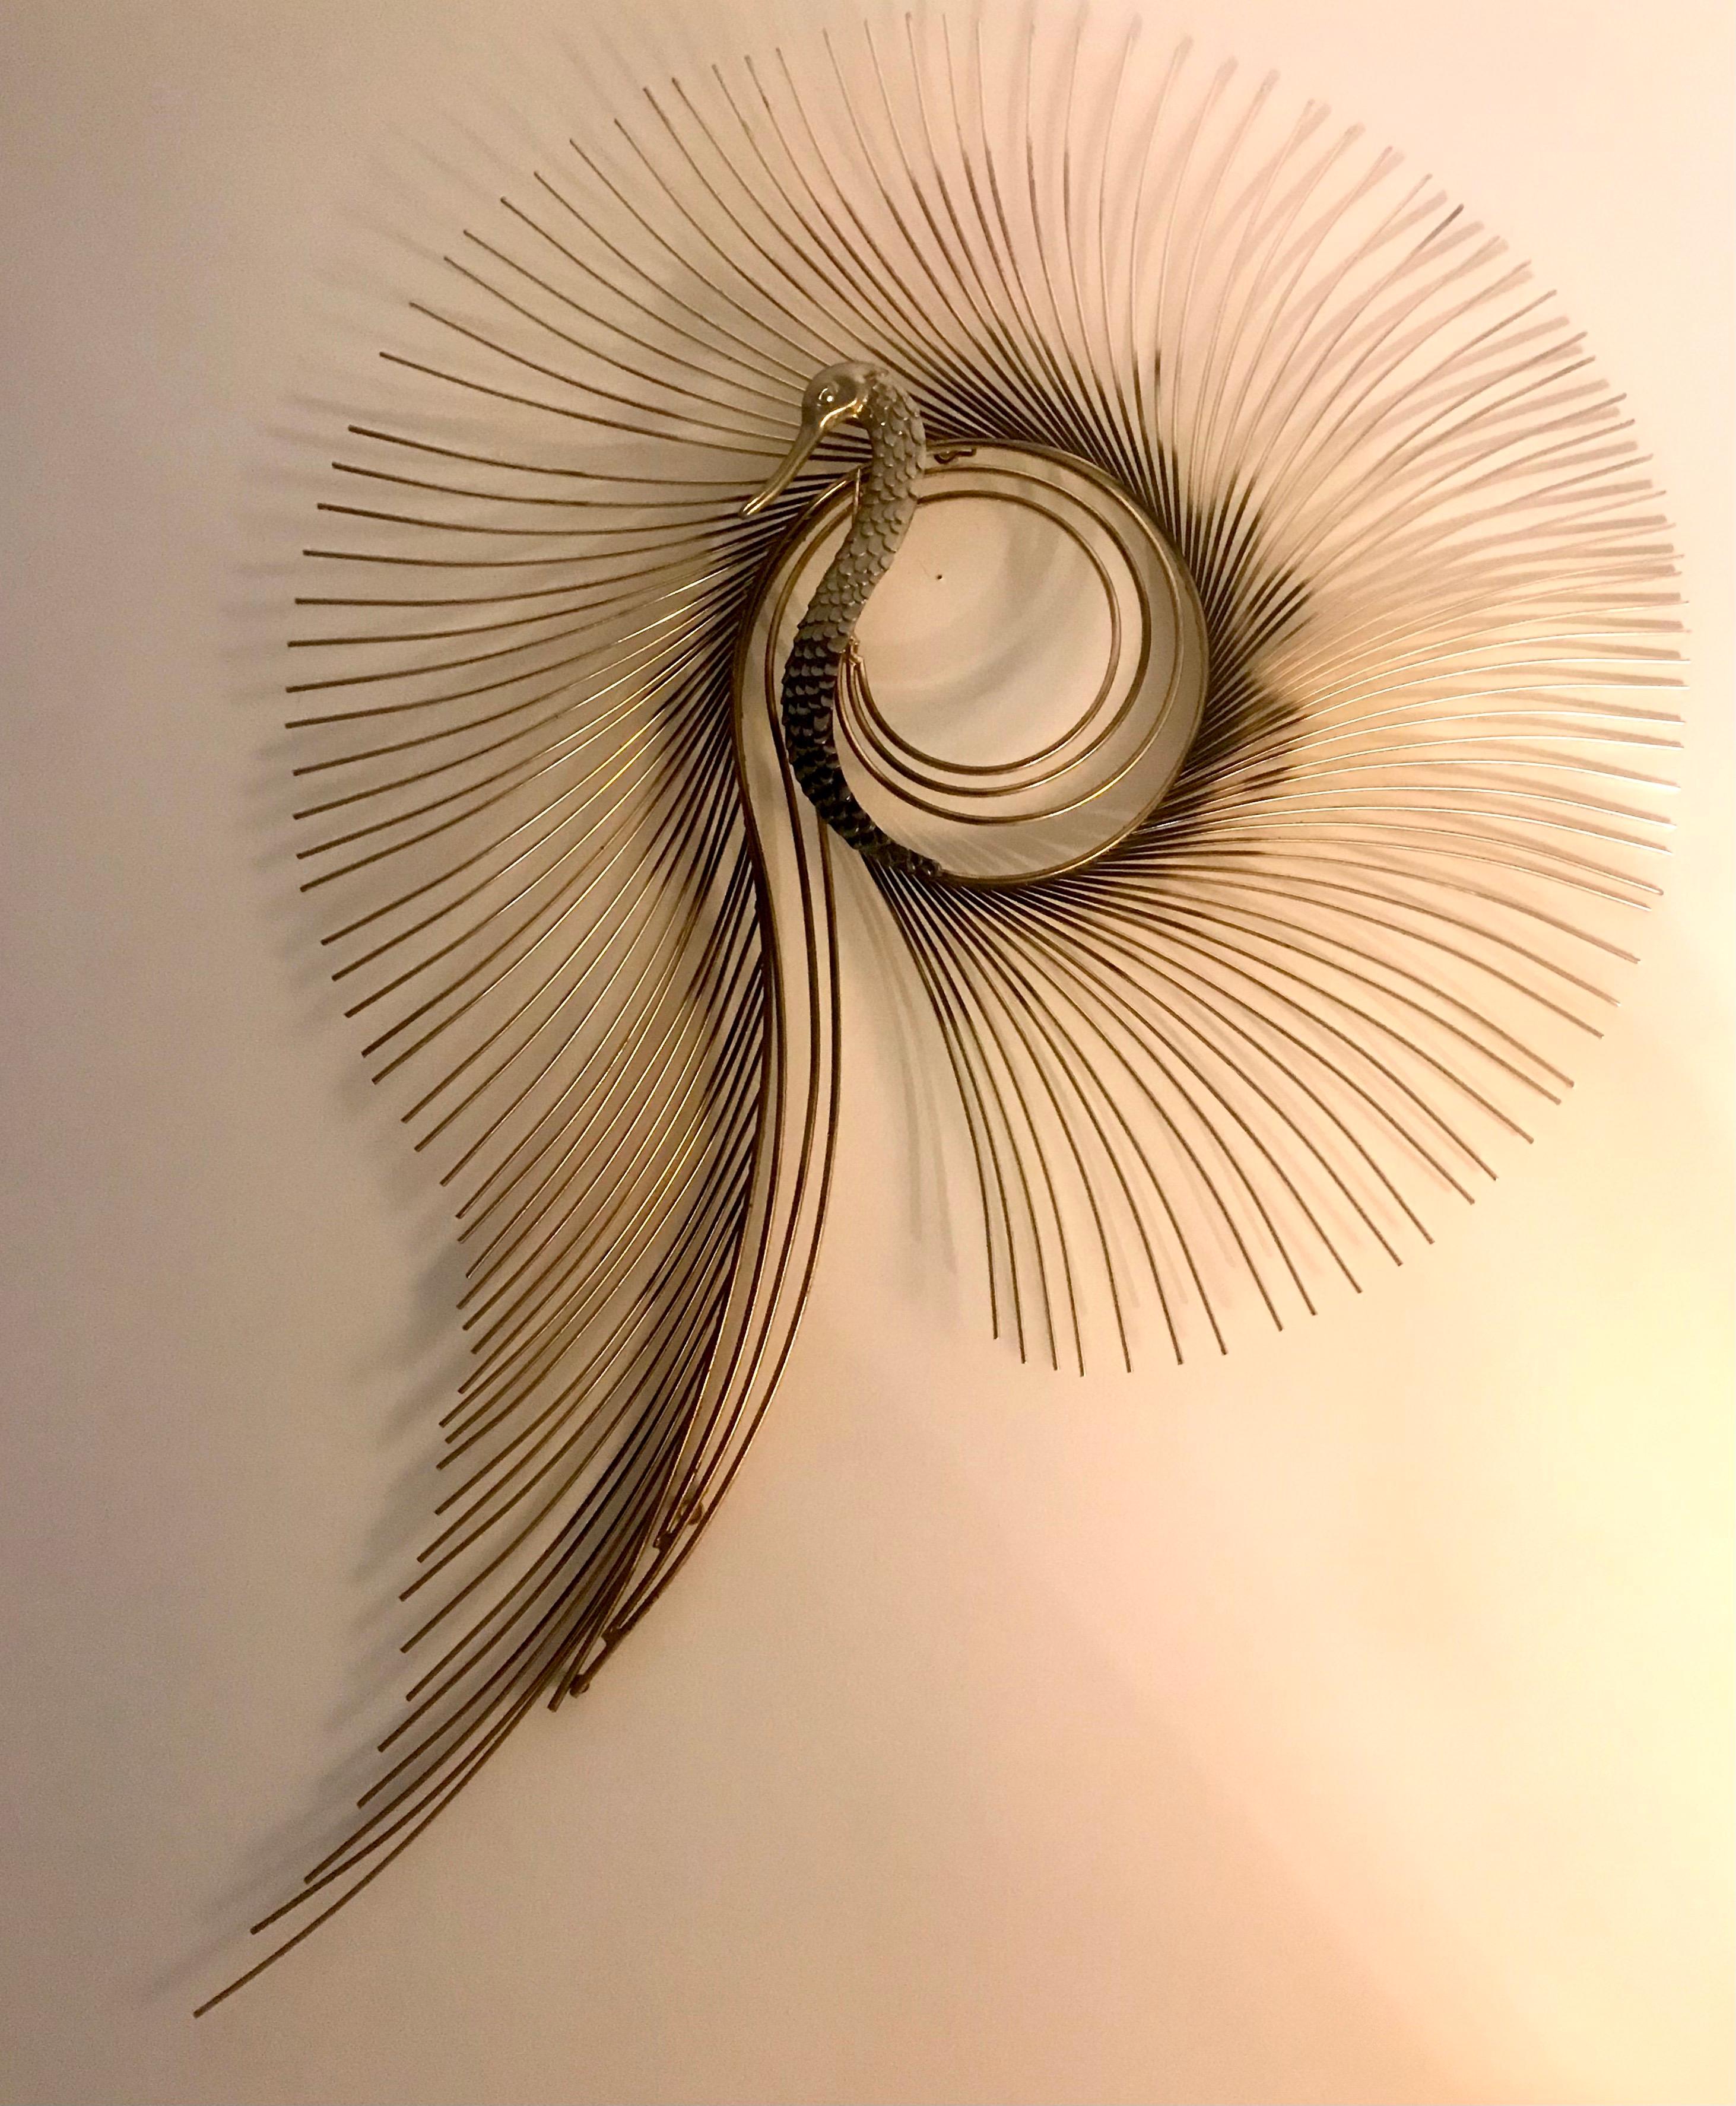 American Brass Peacock Starburst Wall Sculpture Signed Curtis Jere